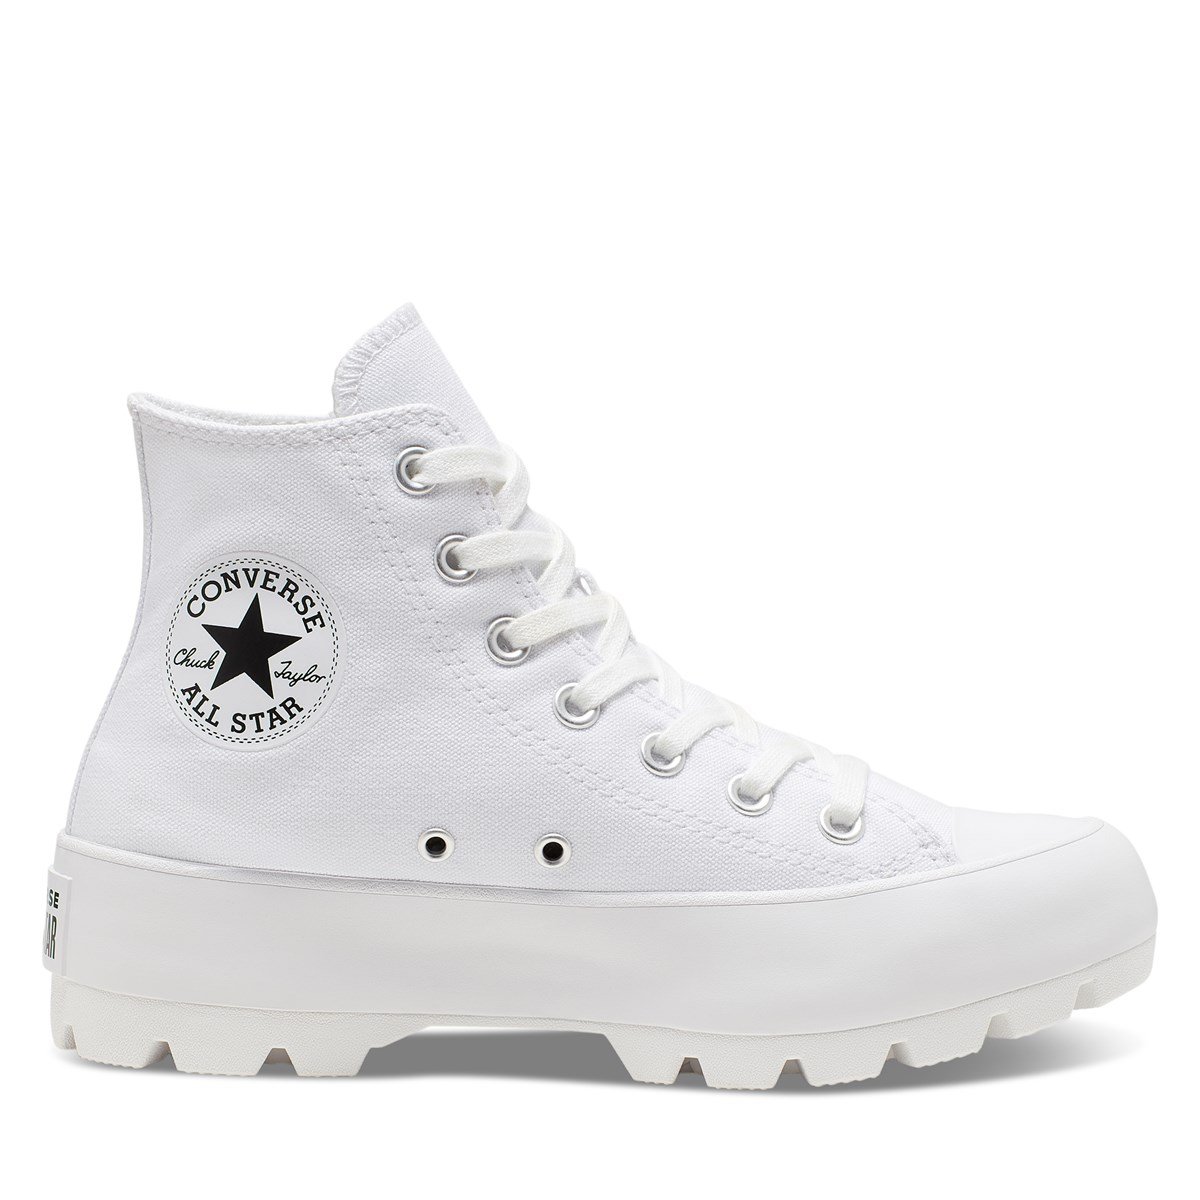 Baskets Chuck Taylor Hi Lugged blanches pour femmes